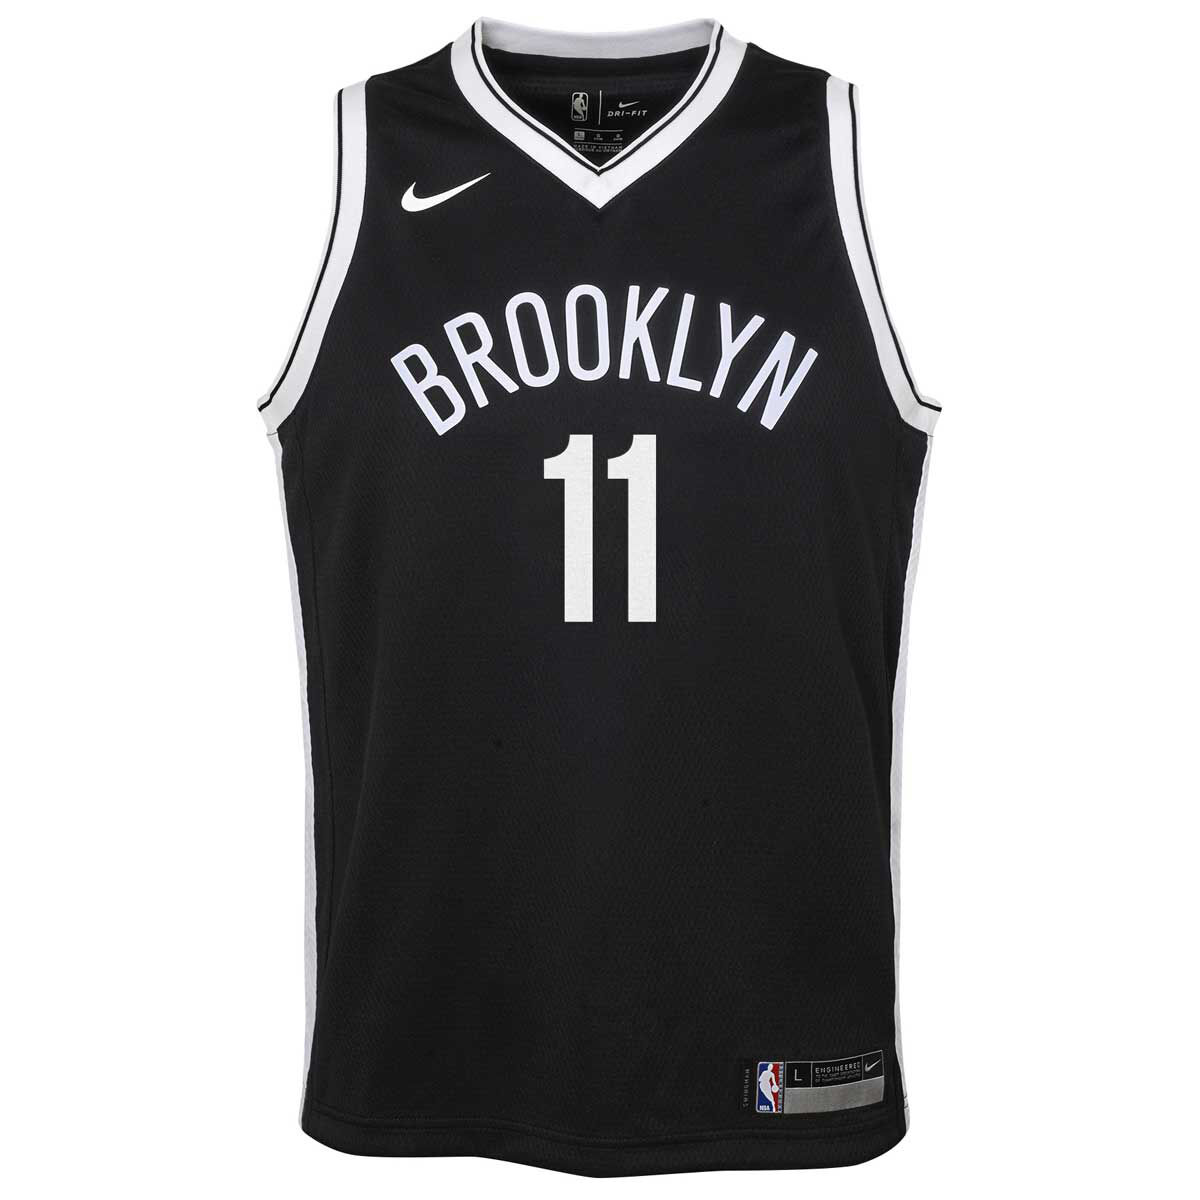 irving kyrie jersey